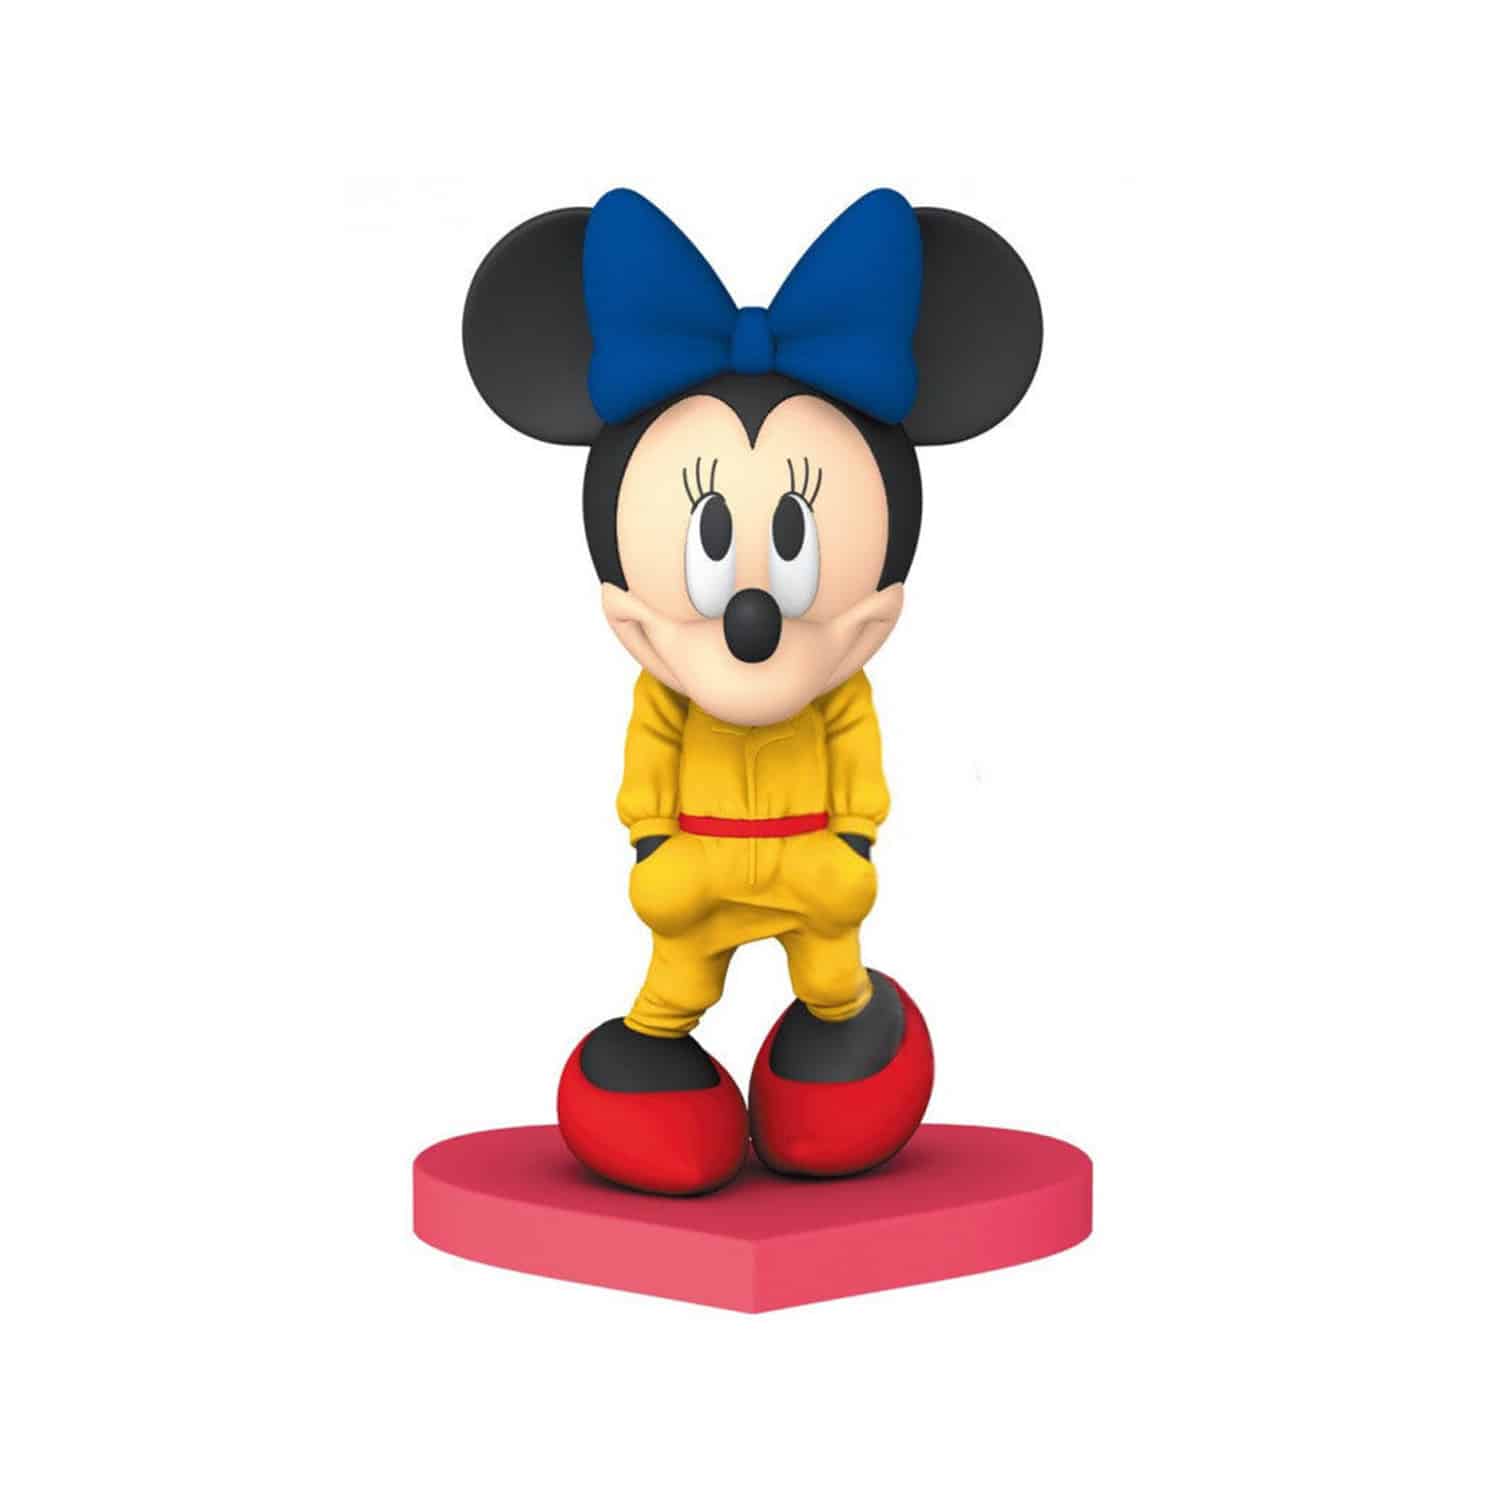 Mickey Mouse - Minnie Mouse Best Dressed Q Posket Figure A